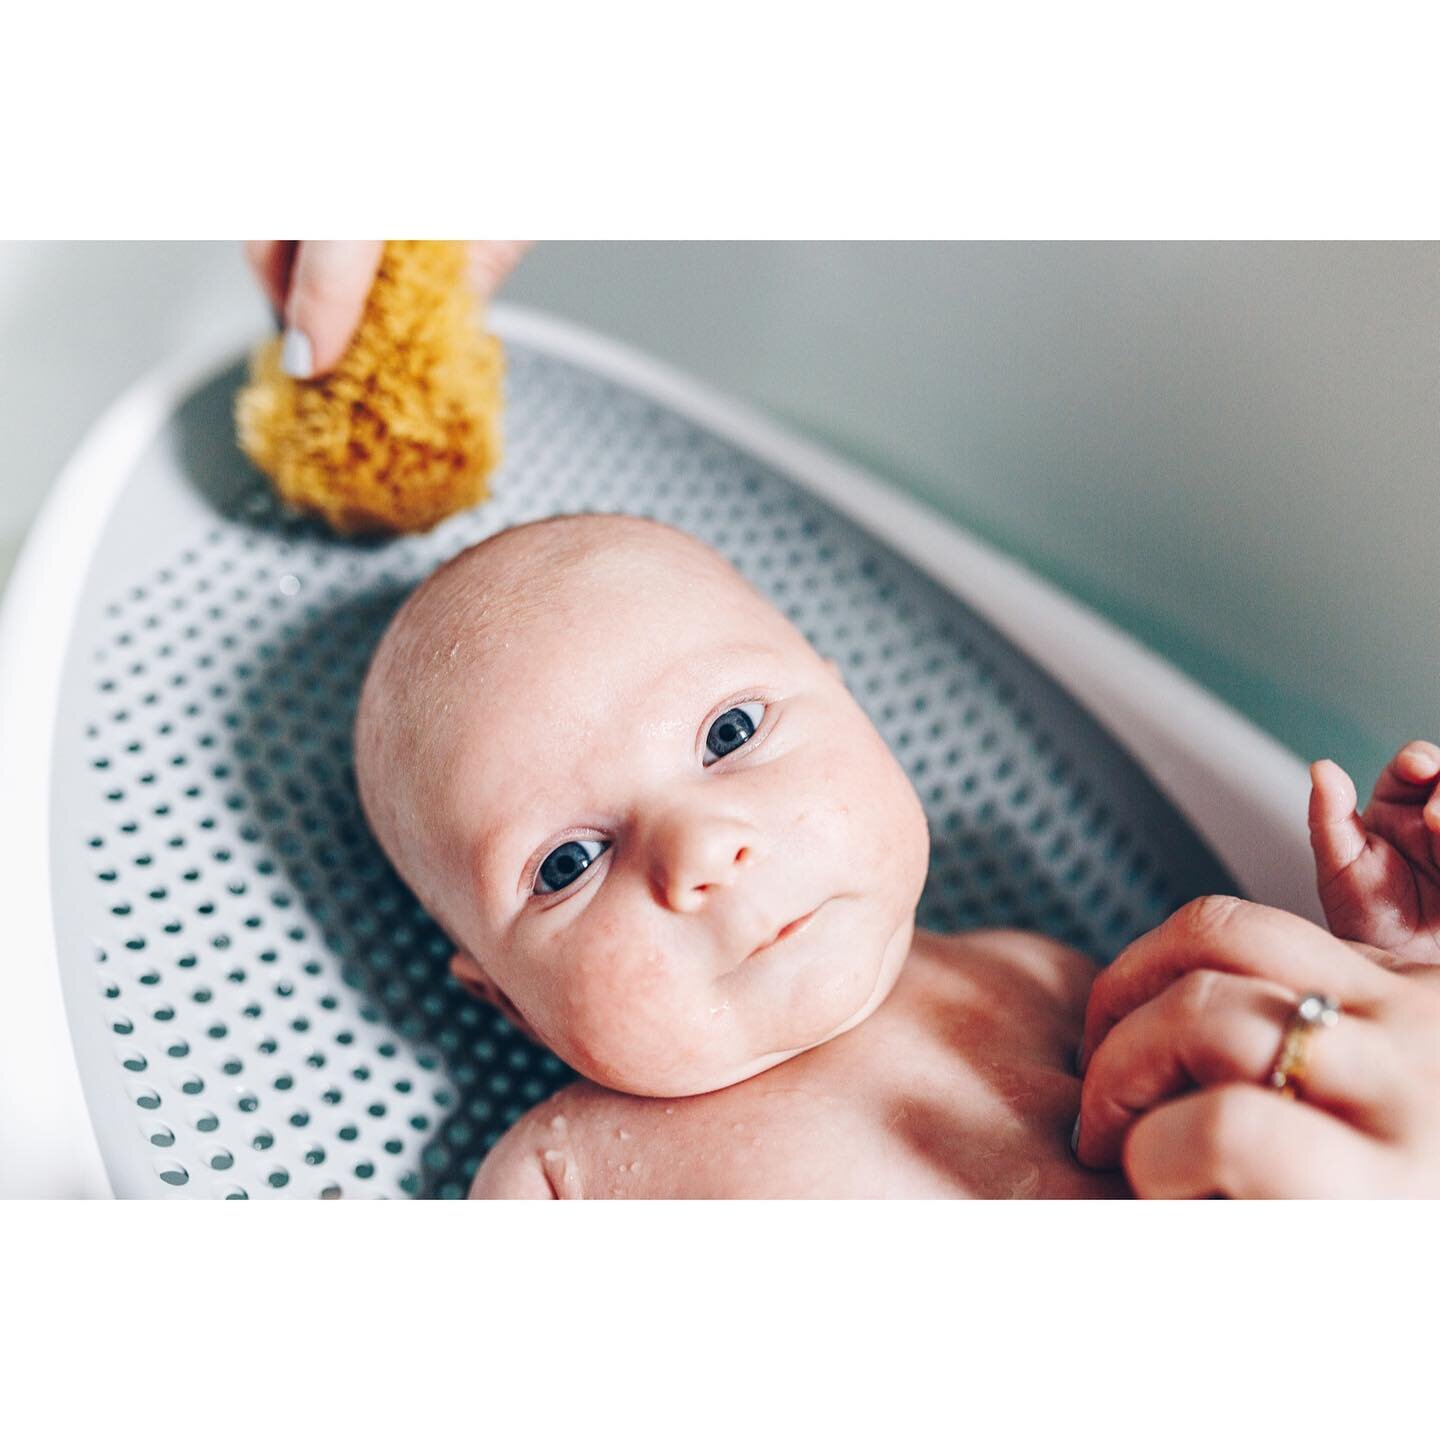 Bath time and blog time for baby Jesse.

#photography  #photographer #naturalphotography  #naturalphotos  #familyphotography #family #familyphotographer  #familyphotoshoot #documentaryphotography #bristol #canon #bristolphotographer  #naturalportrait